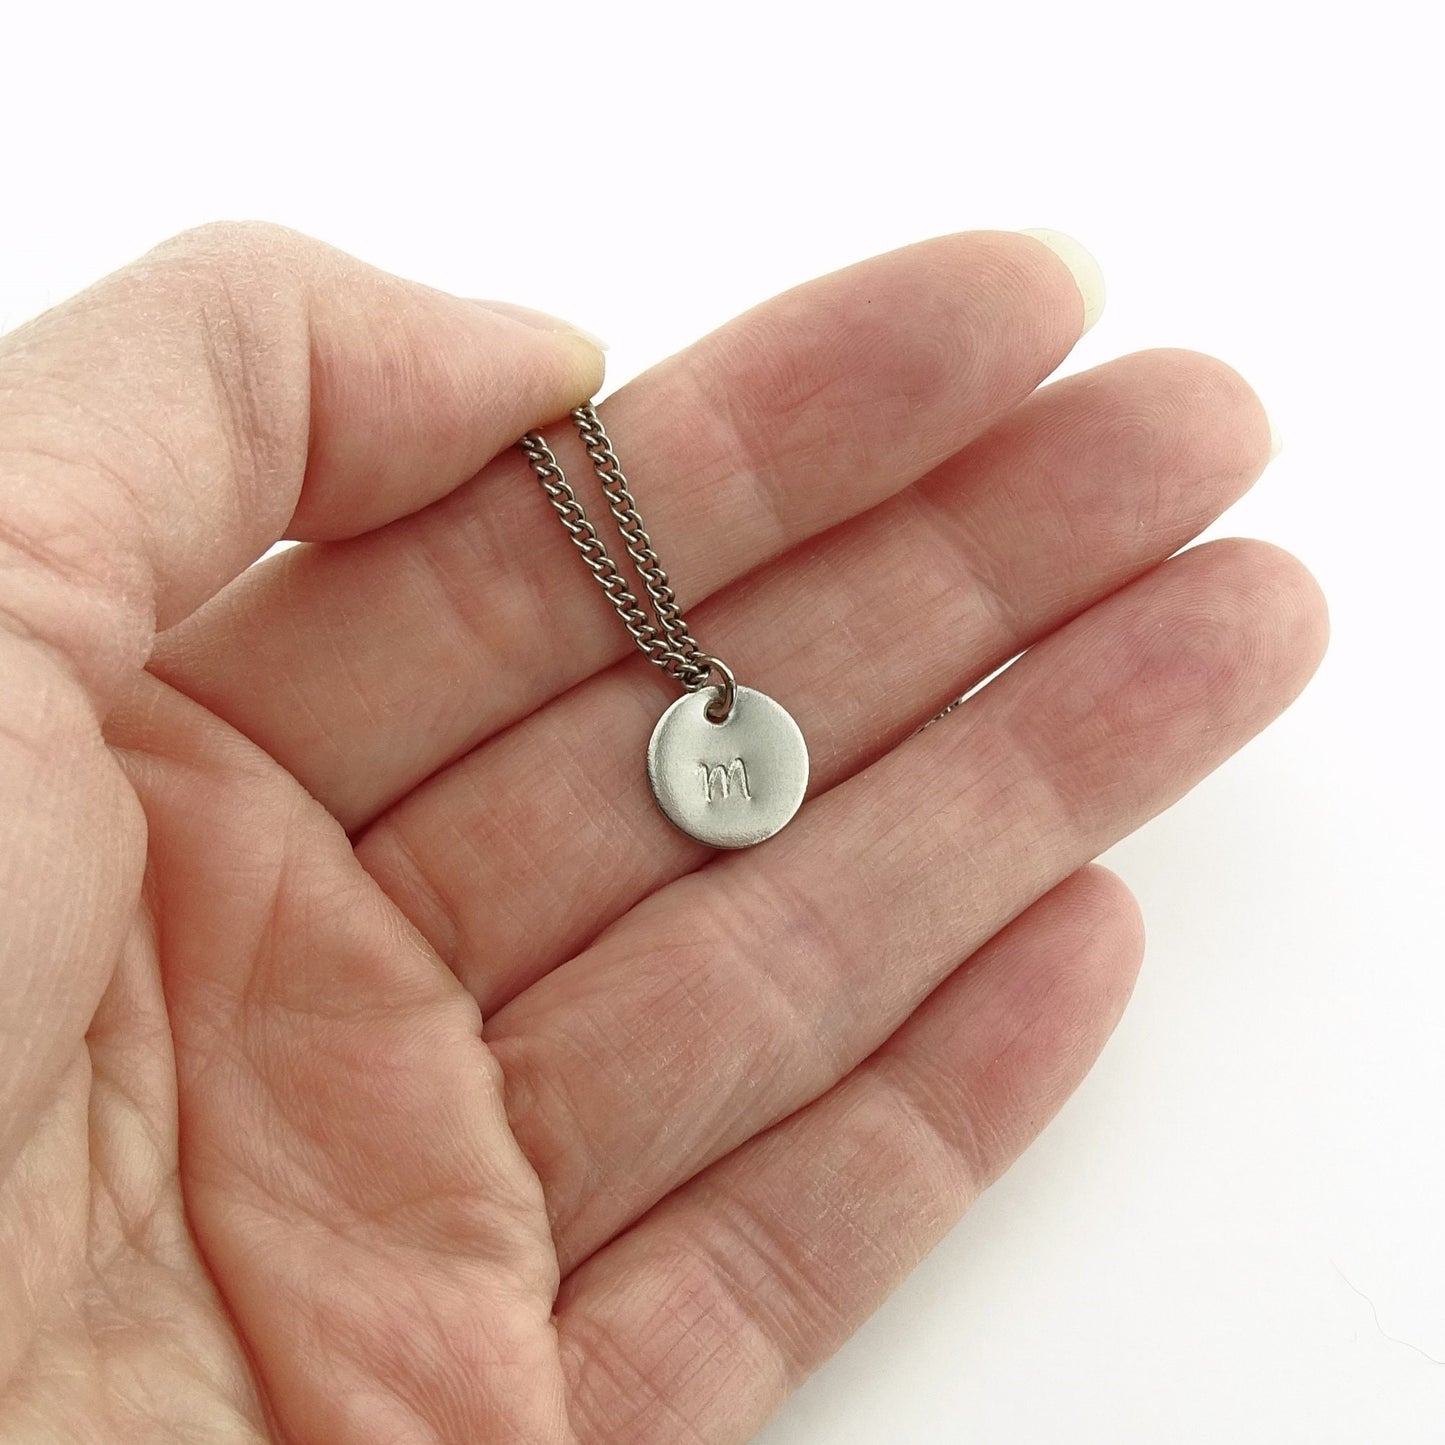 Personalized Initial Charm Only, Hand Stamped Letter Niobium Disc Pendant for Sensitive Skin, Hypoallergenic Nickel Free Disk Add On